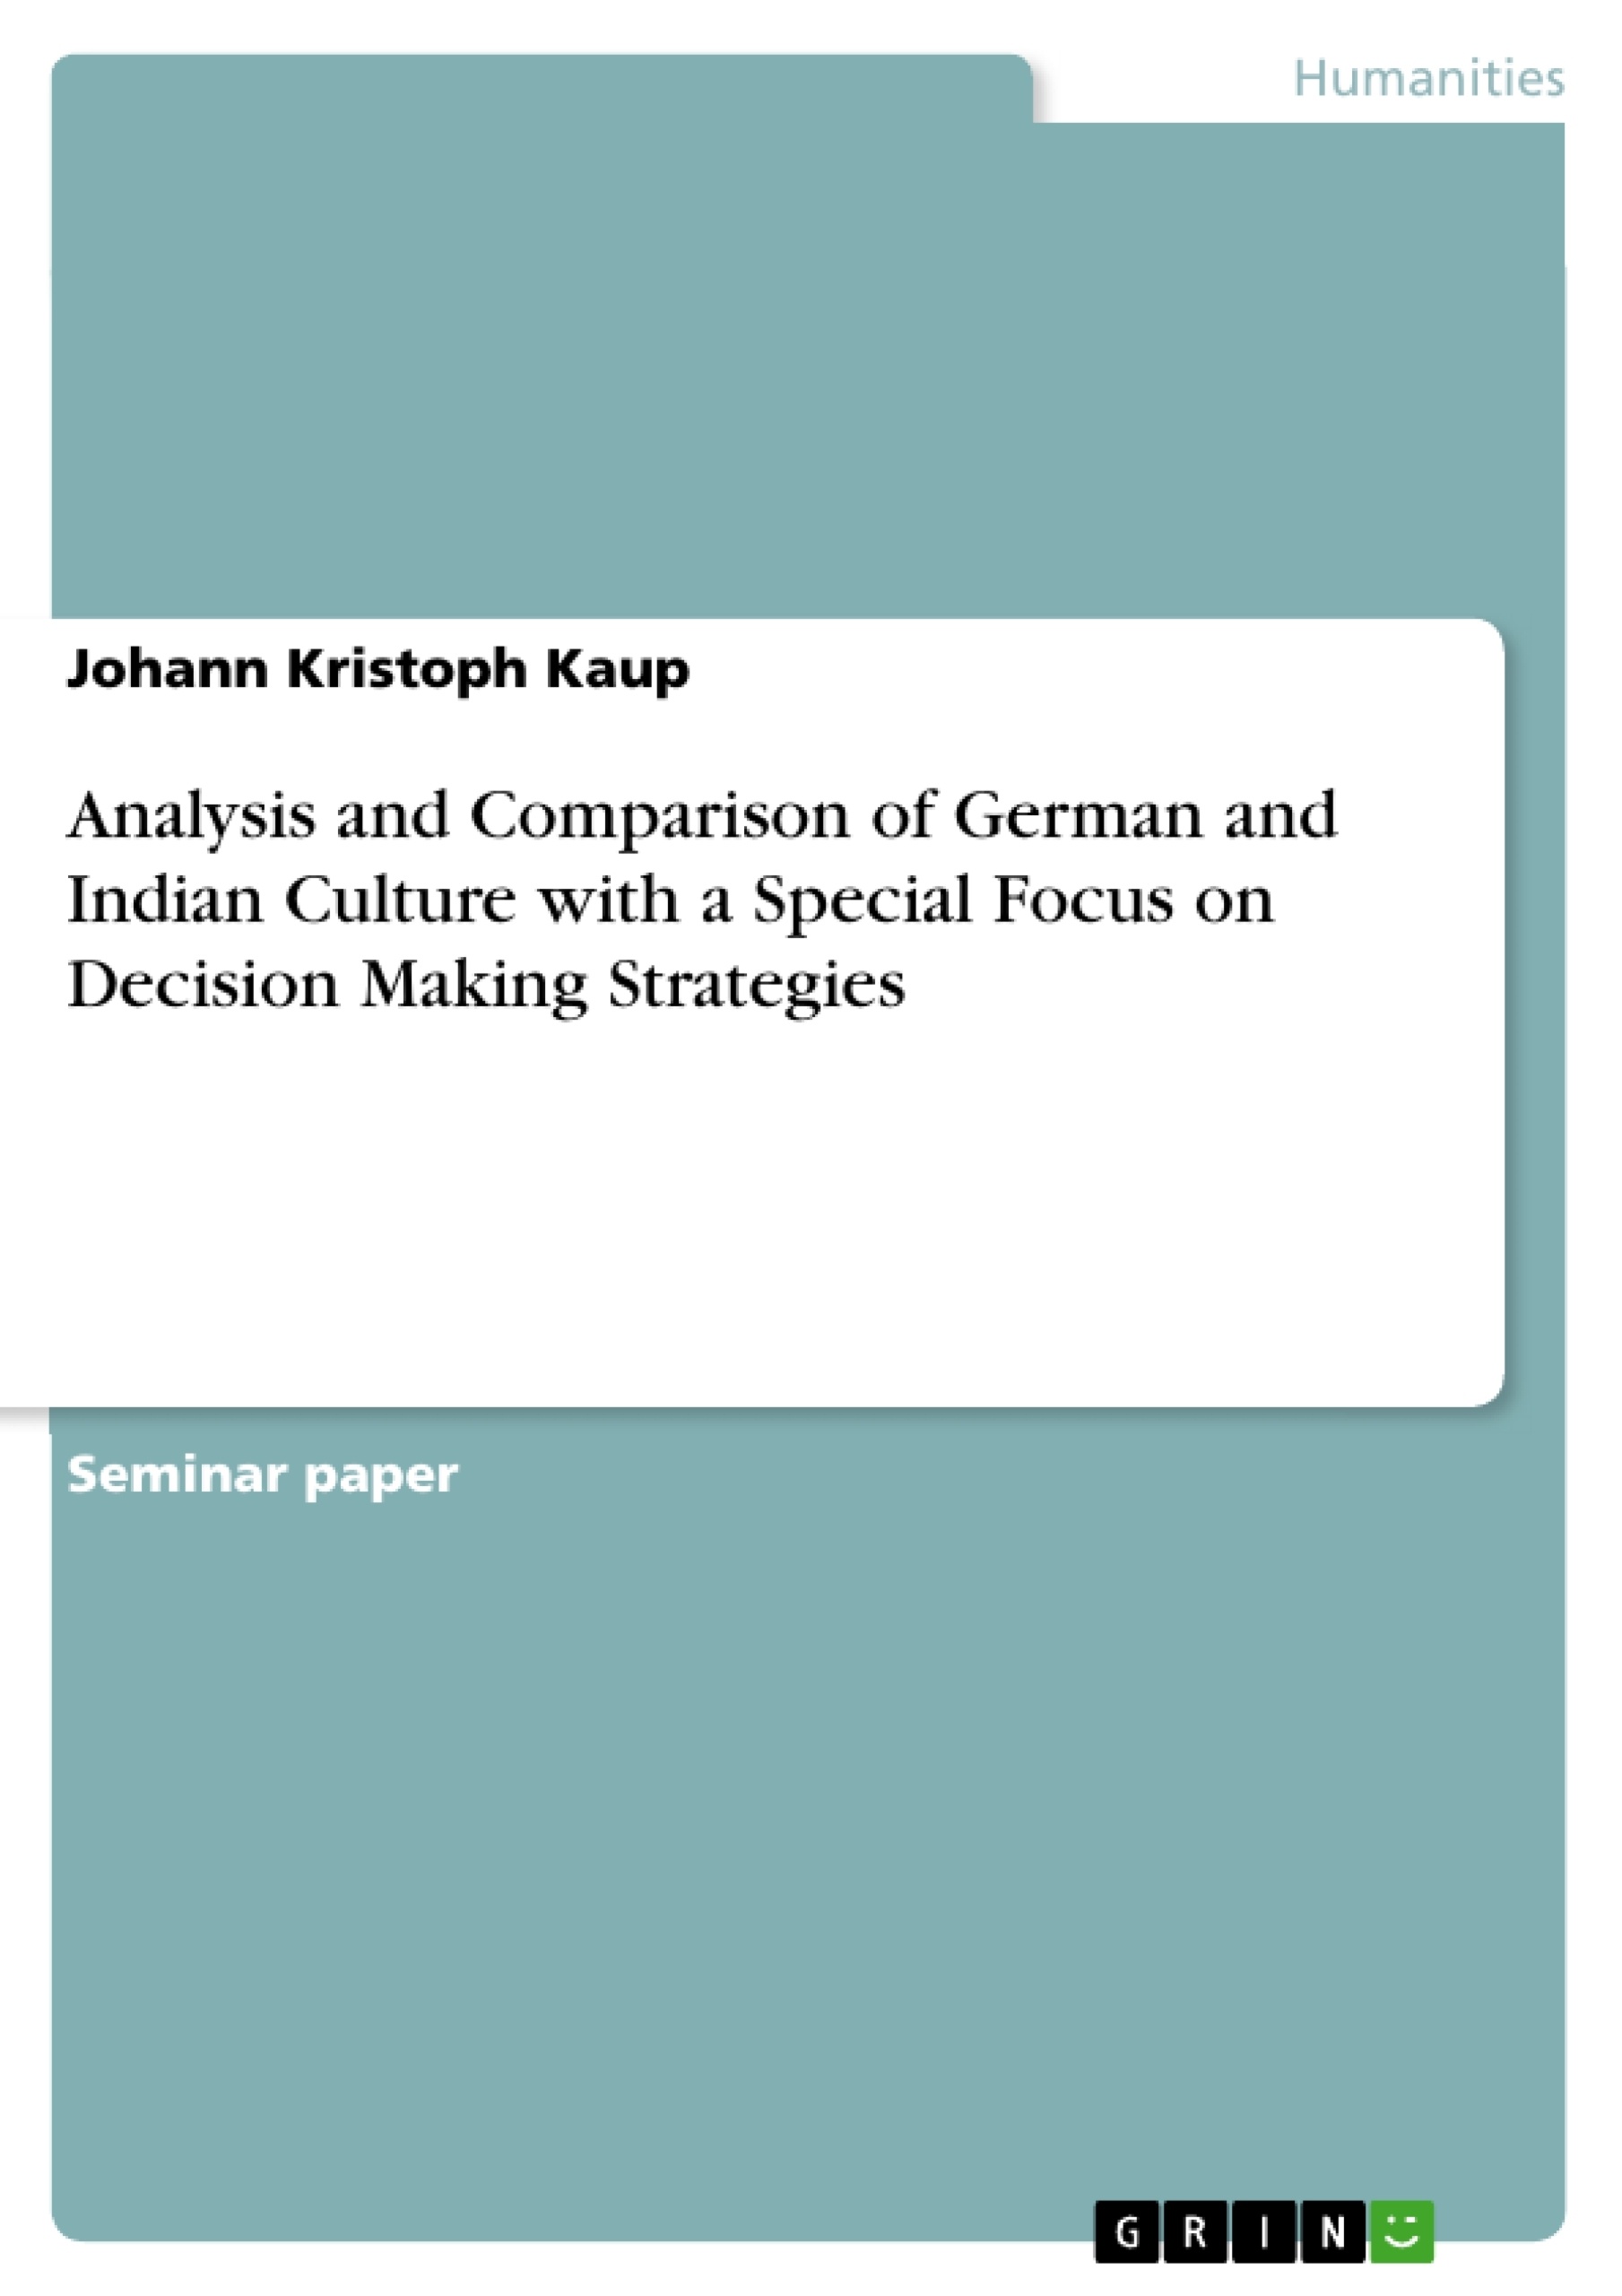 Título: Analysis and Comparison of German and Indian Culture with a Special Focus on Decision Making Strategies